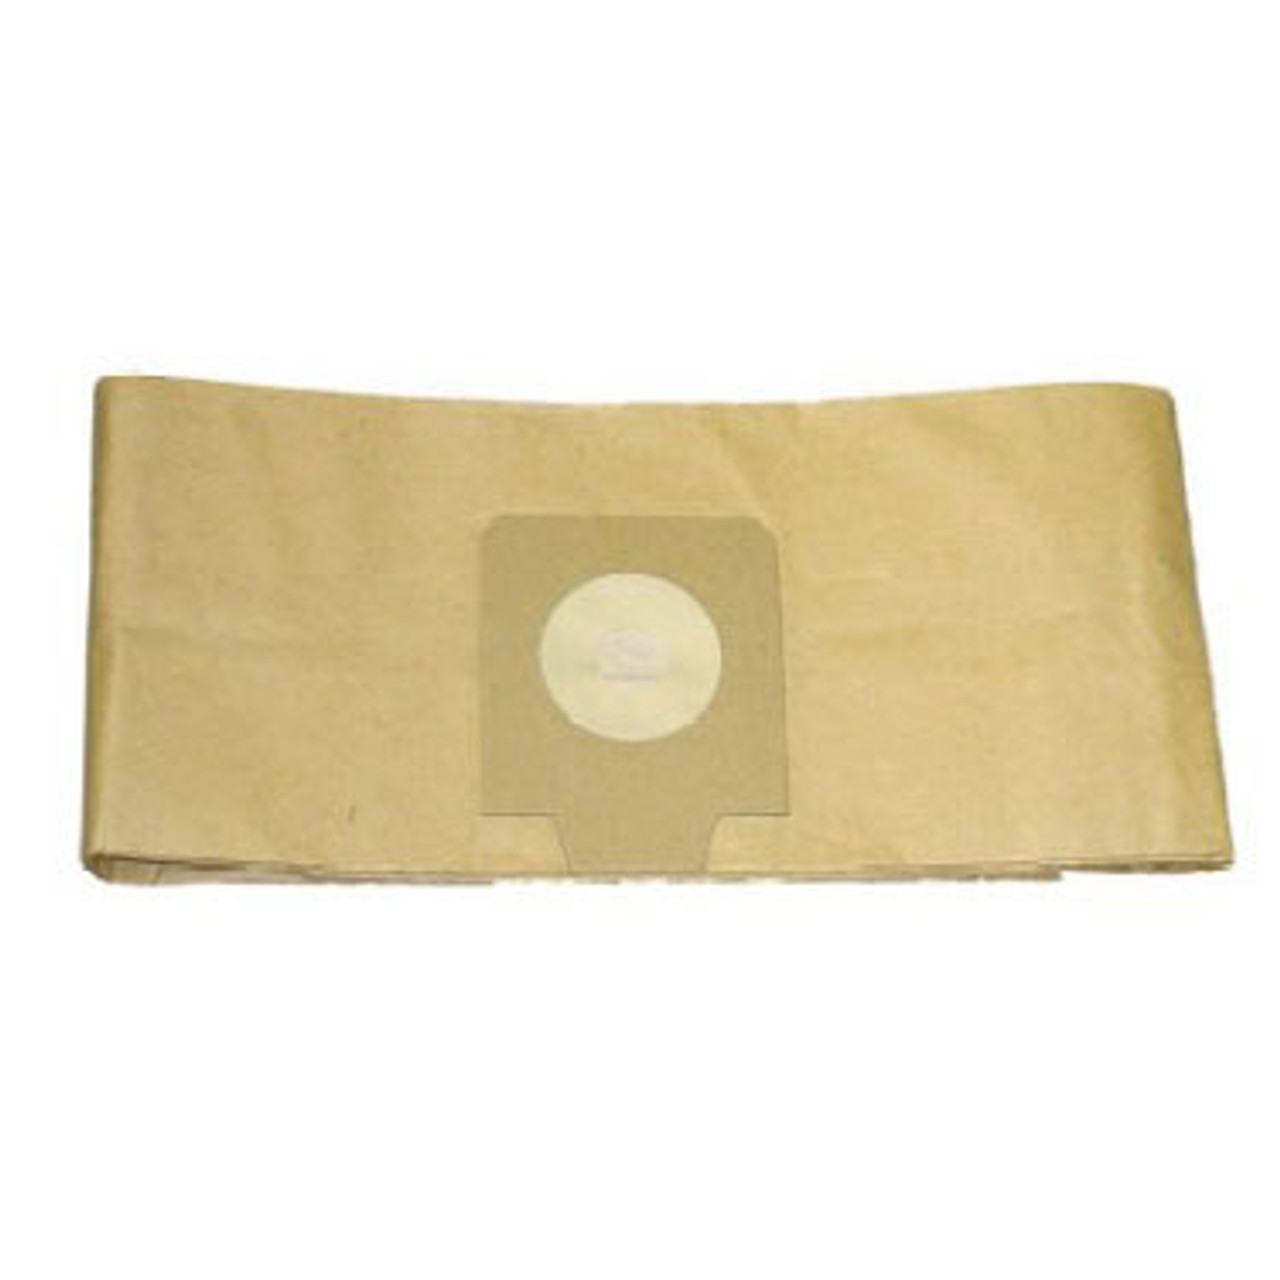 Filter Bag Synthetic for the HEPAPRO4